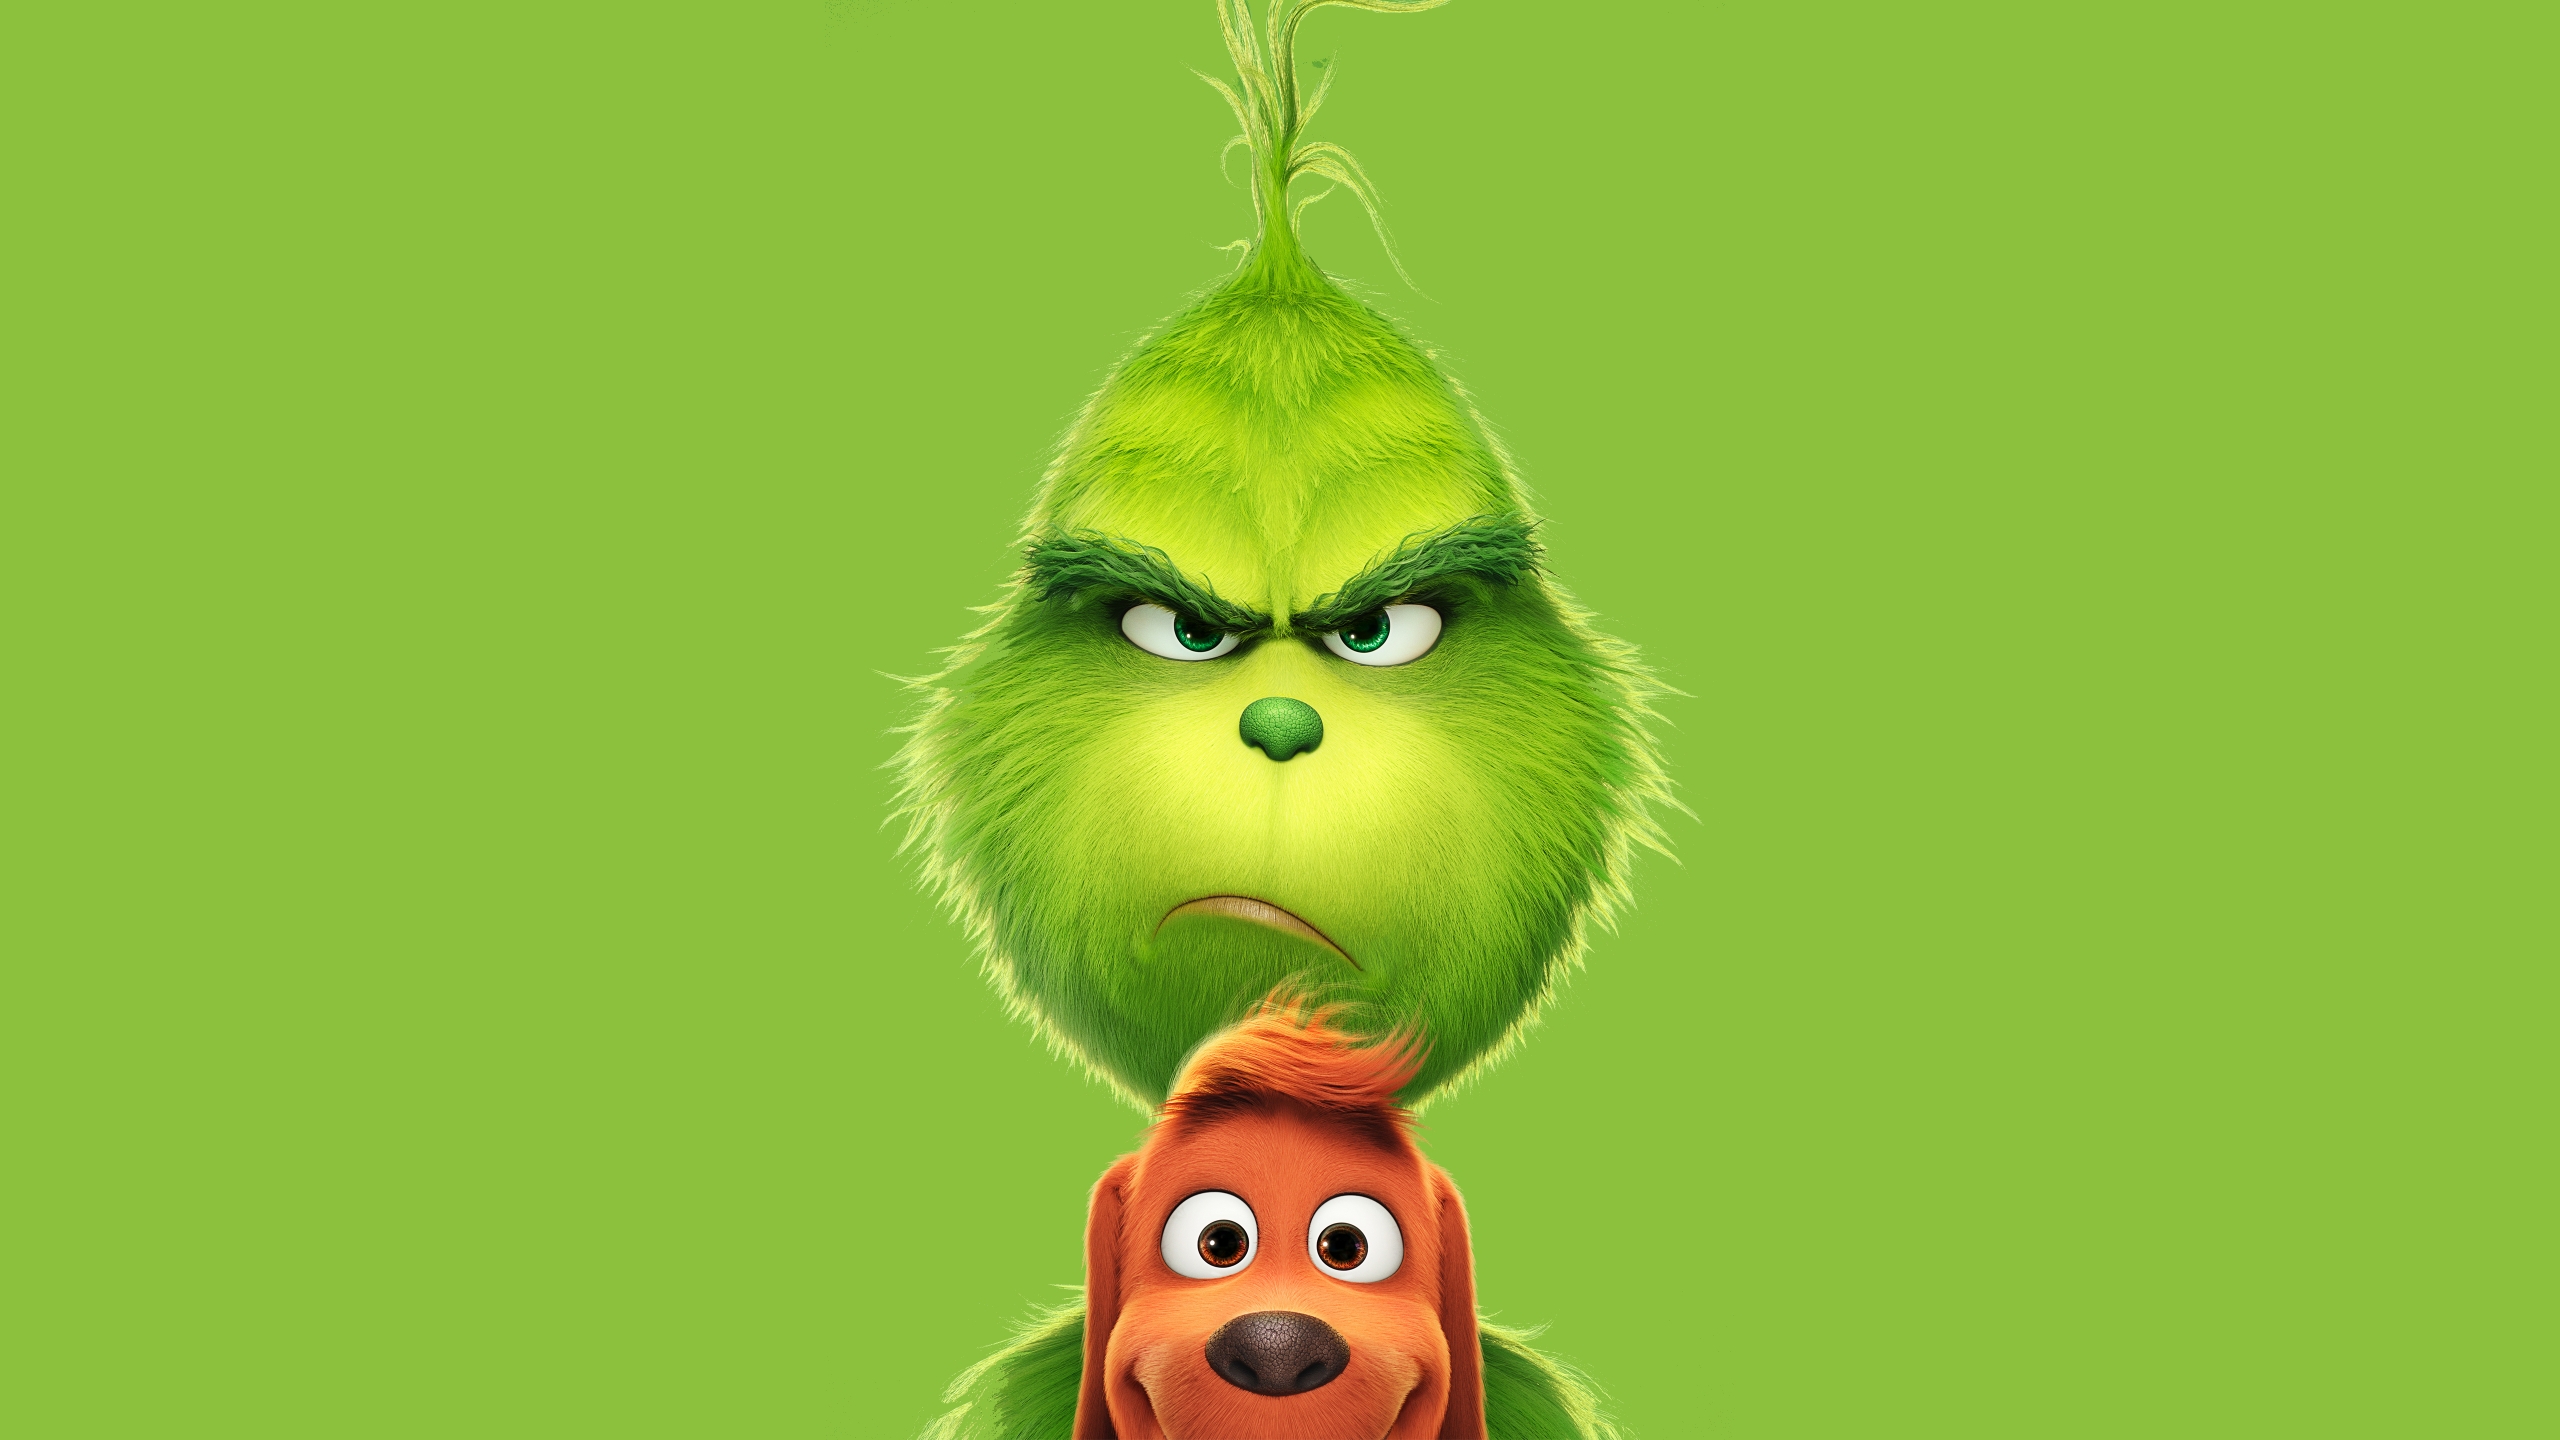 The Grinch Movie Animated film Wallpaper 5k Ultra HD ID:4332